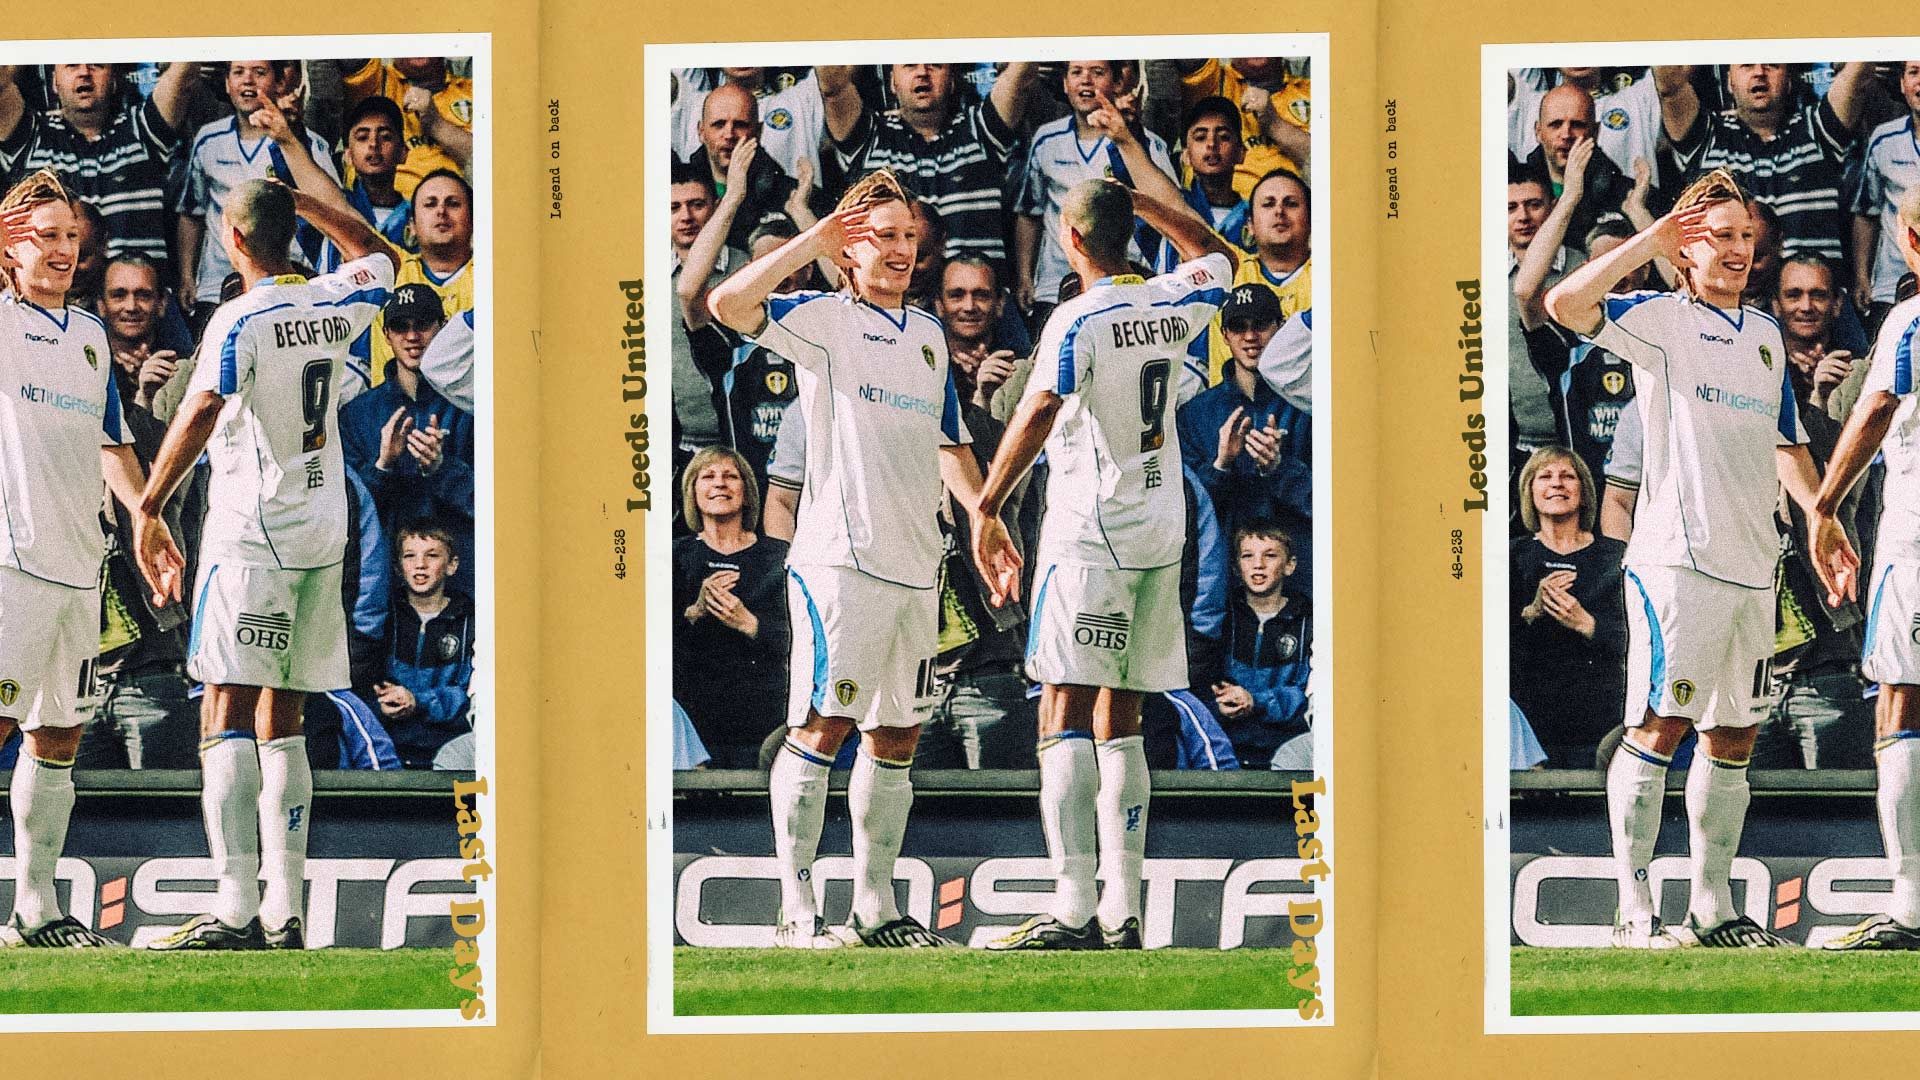 Luciano Becchio and Jermaine Beckford celebrating another goal by saluting each other in the sunshine. All the good stuff